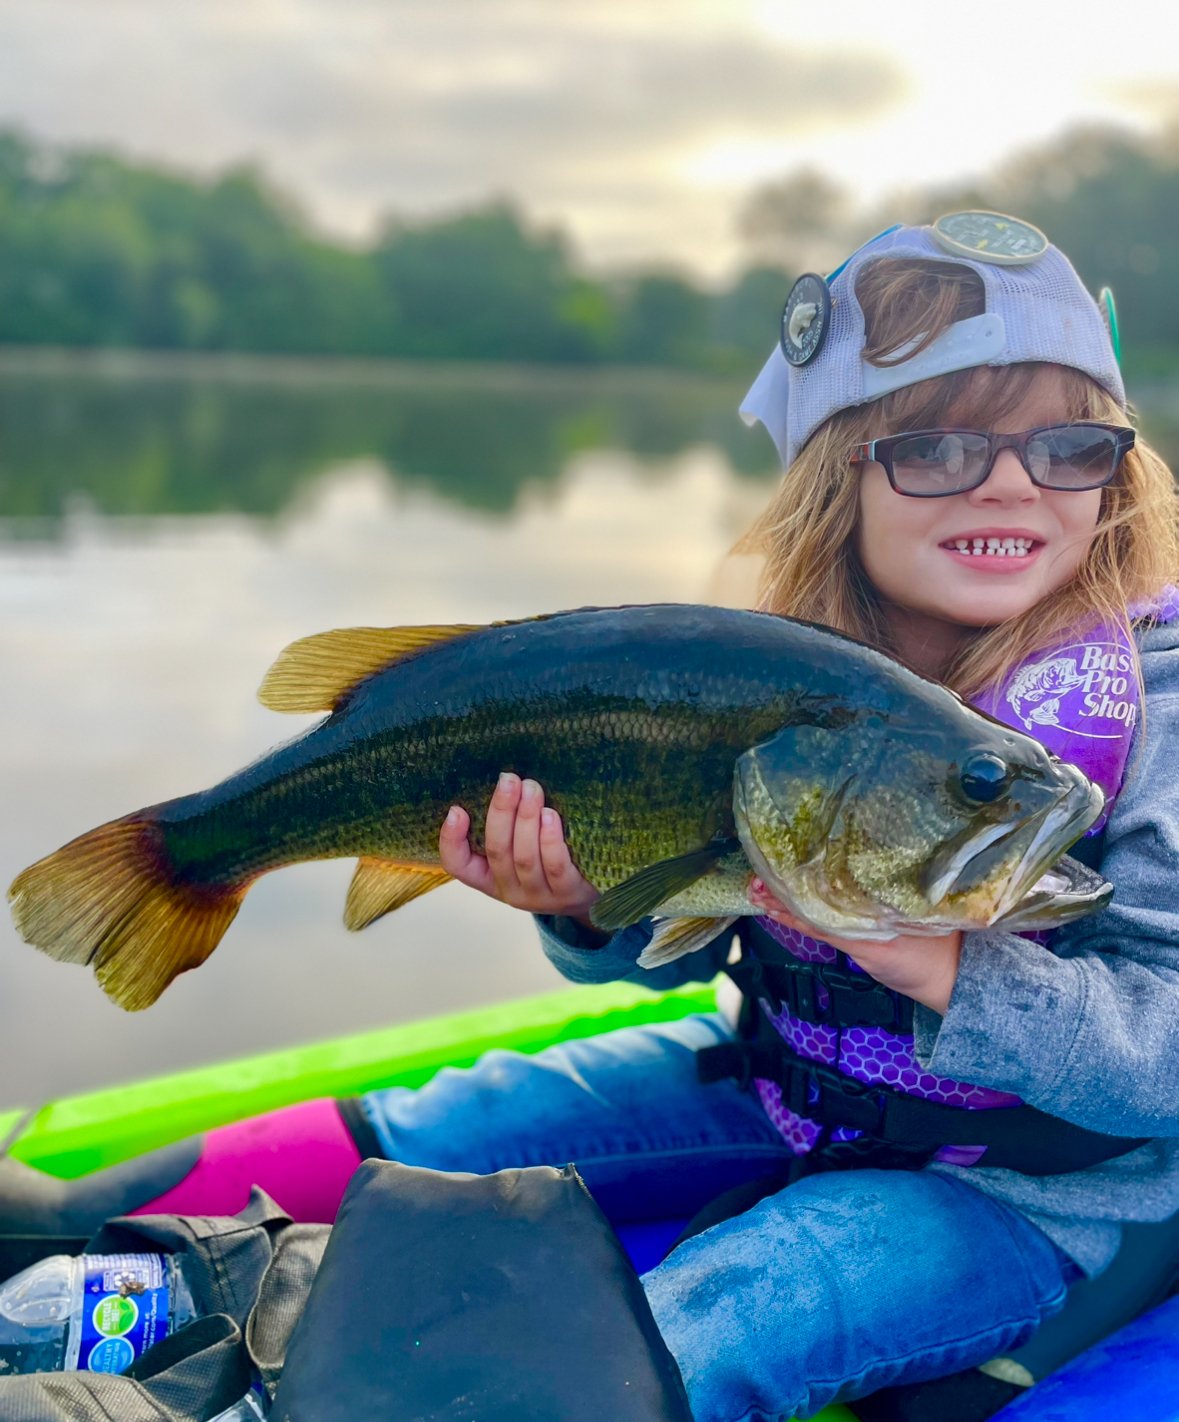 Bass Pro Shops on X: Check out our new feature, the Kid's Braggin